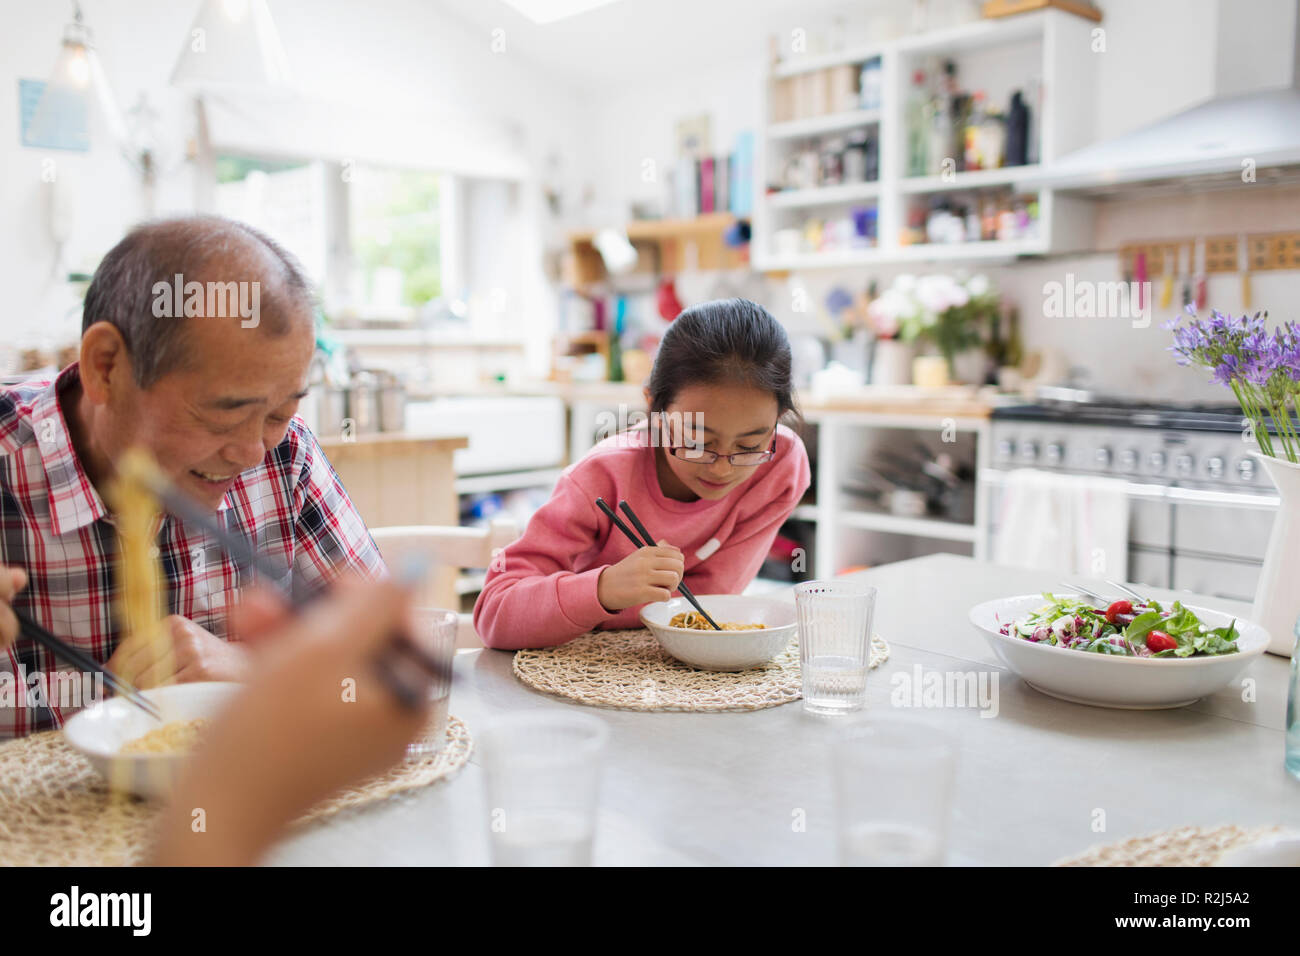 Grandfather and granddaughter eating noodles with chopsticks at table Stock Photo